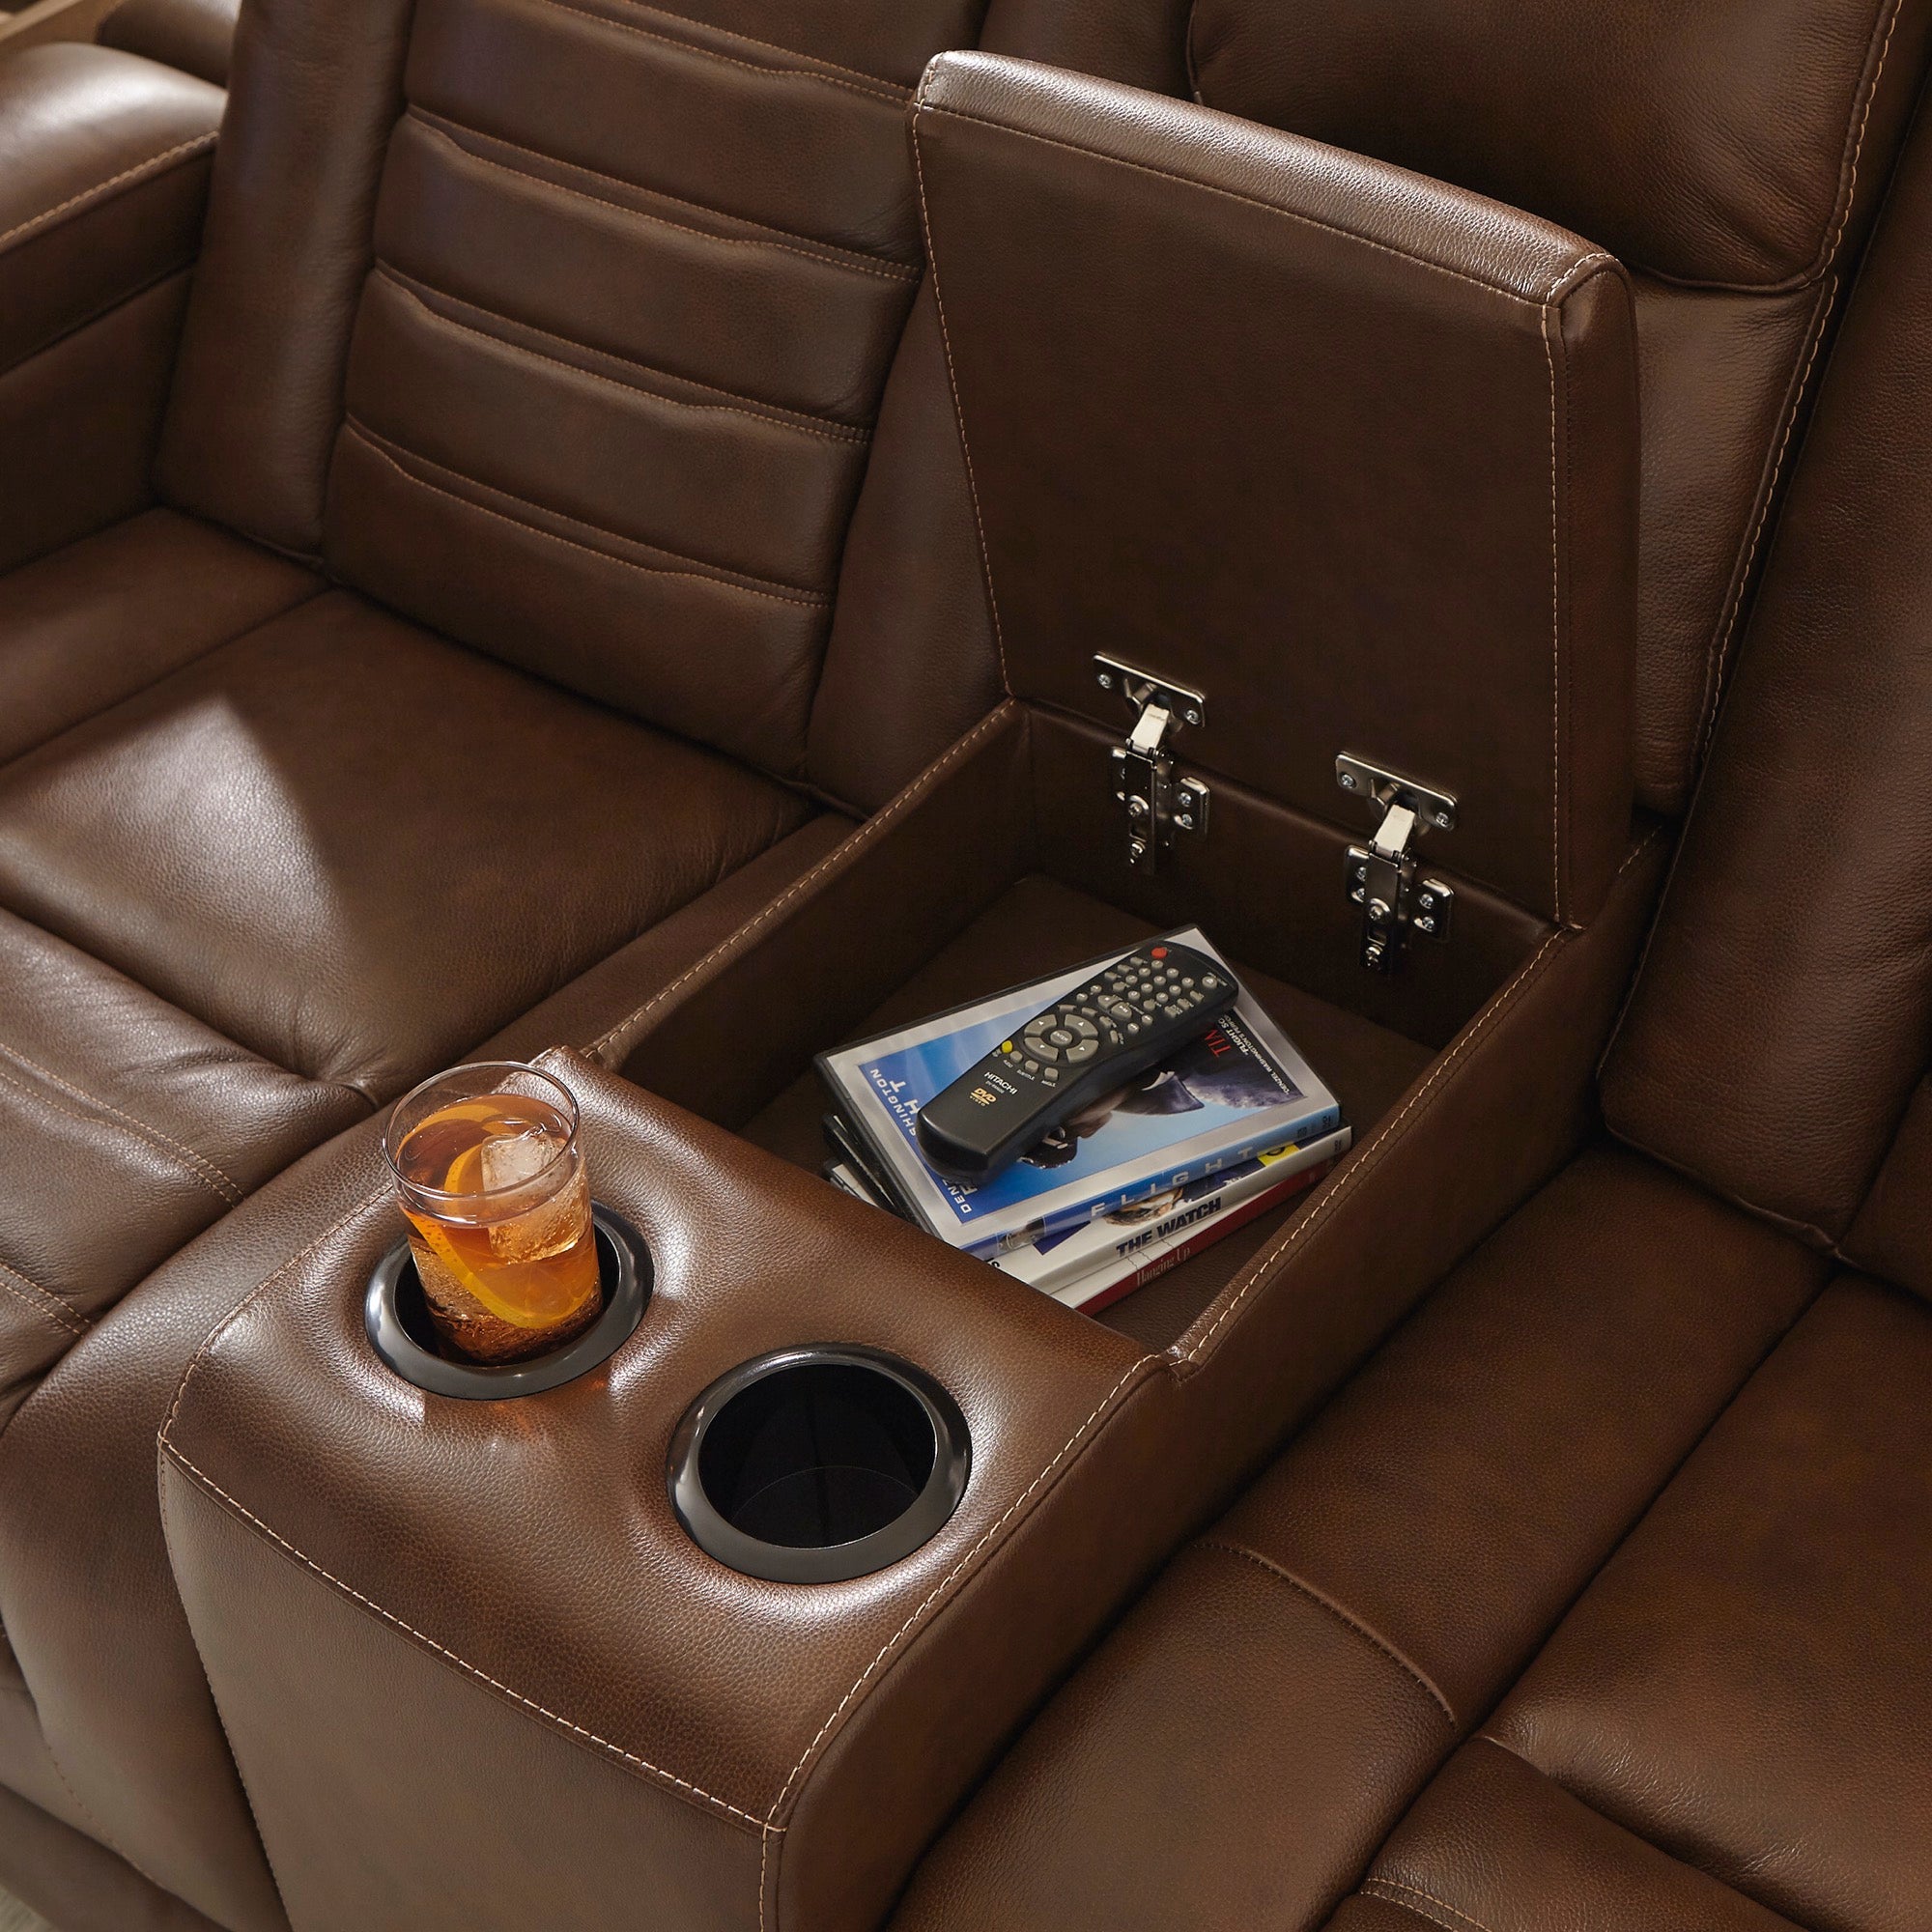 Backtrack Power Reclining Loveseat with Console